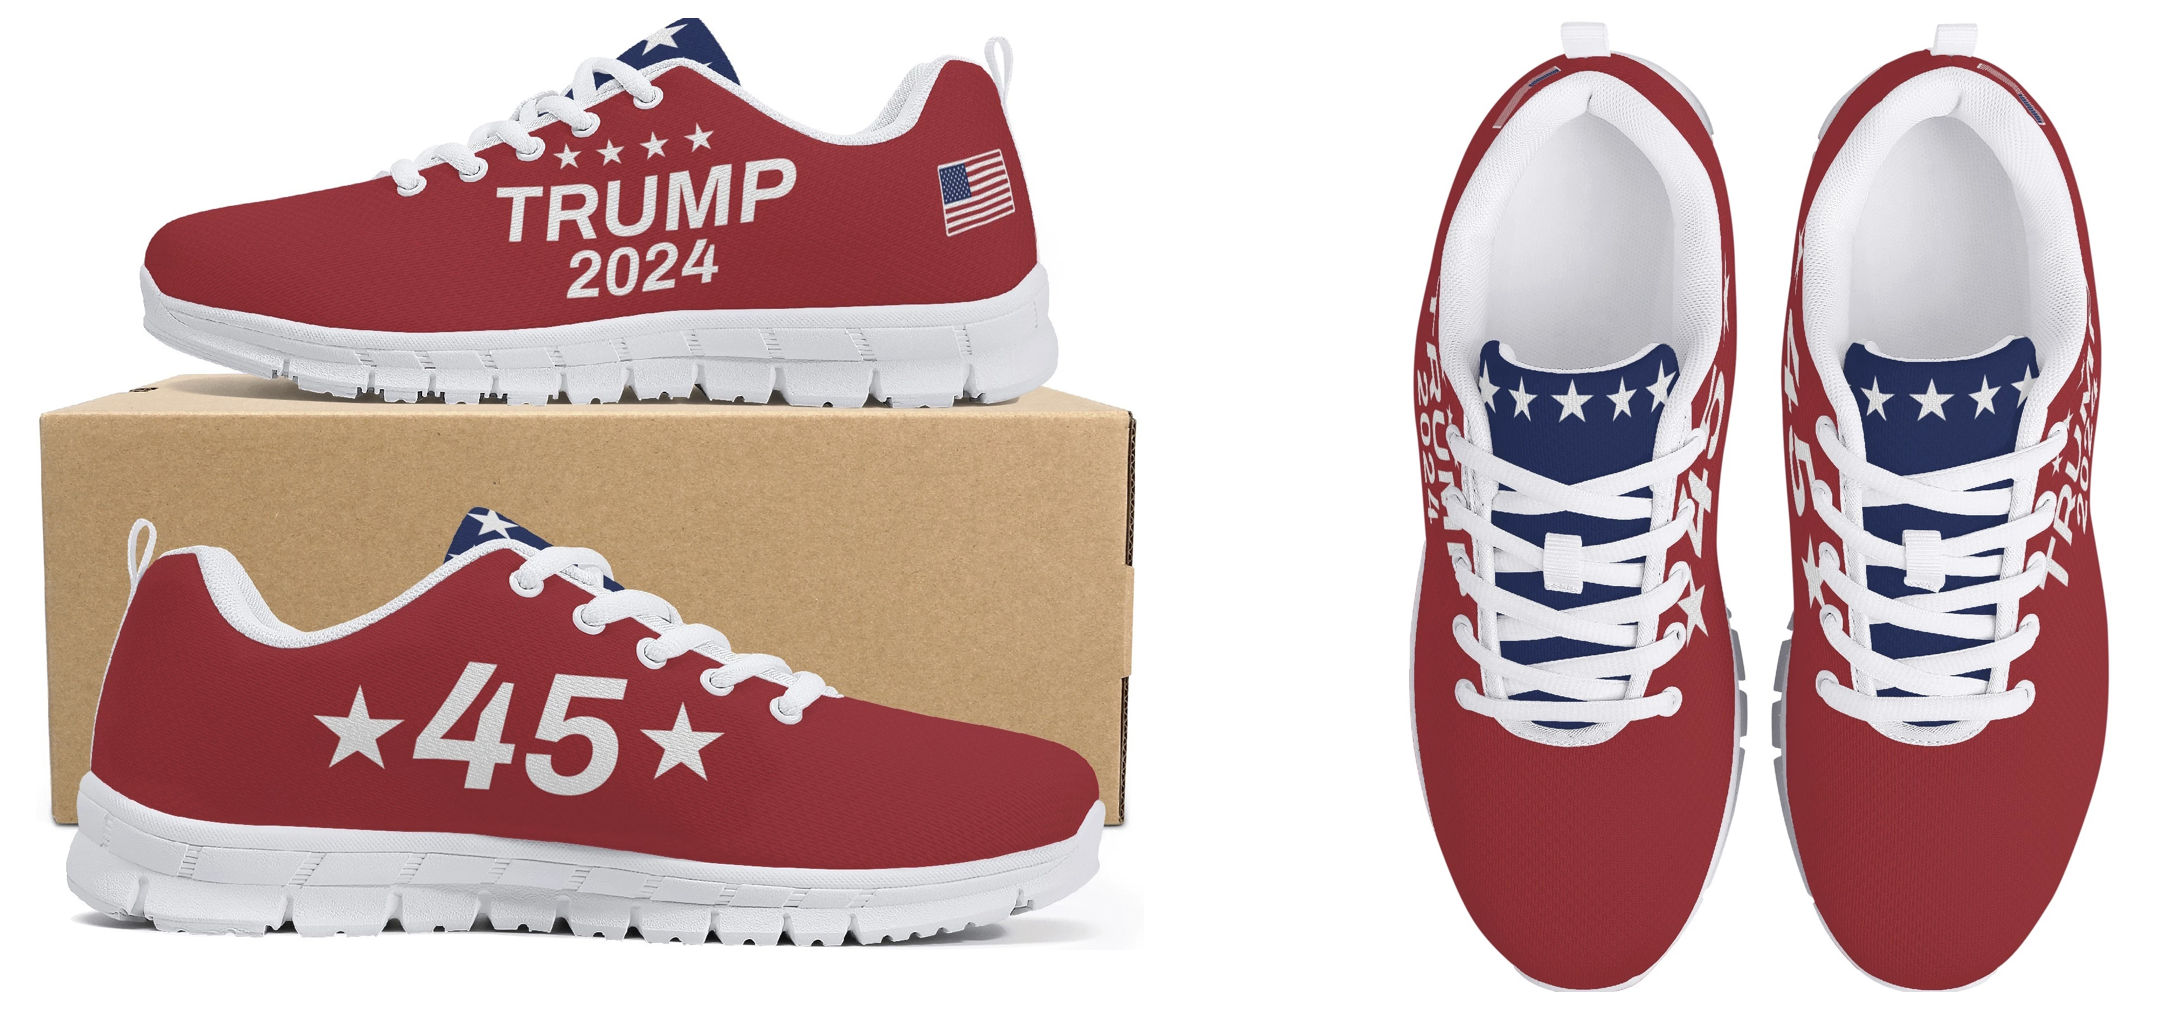 Red & White Trump Shoes